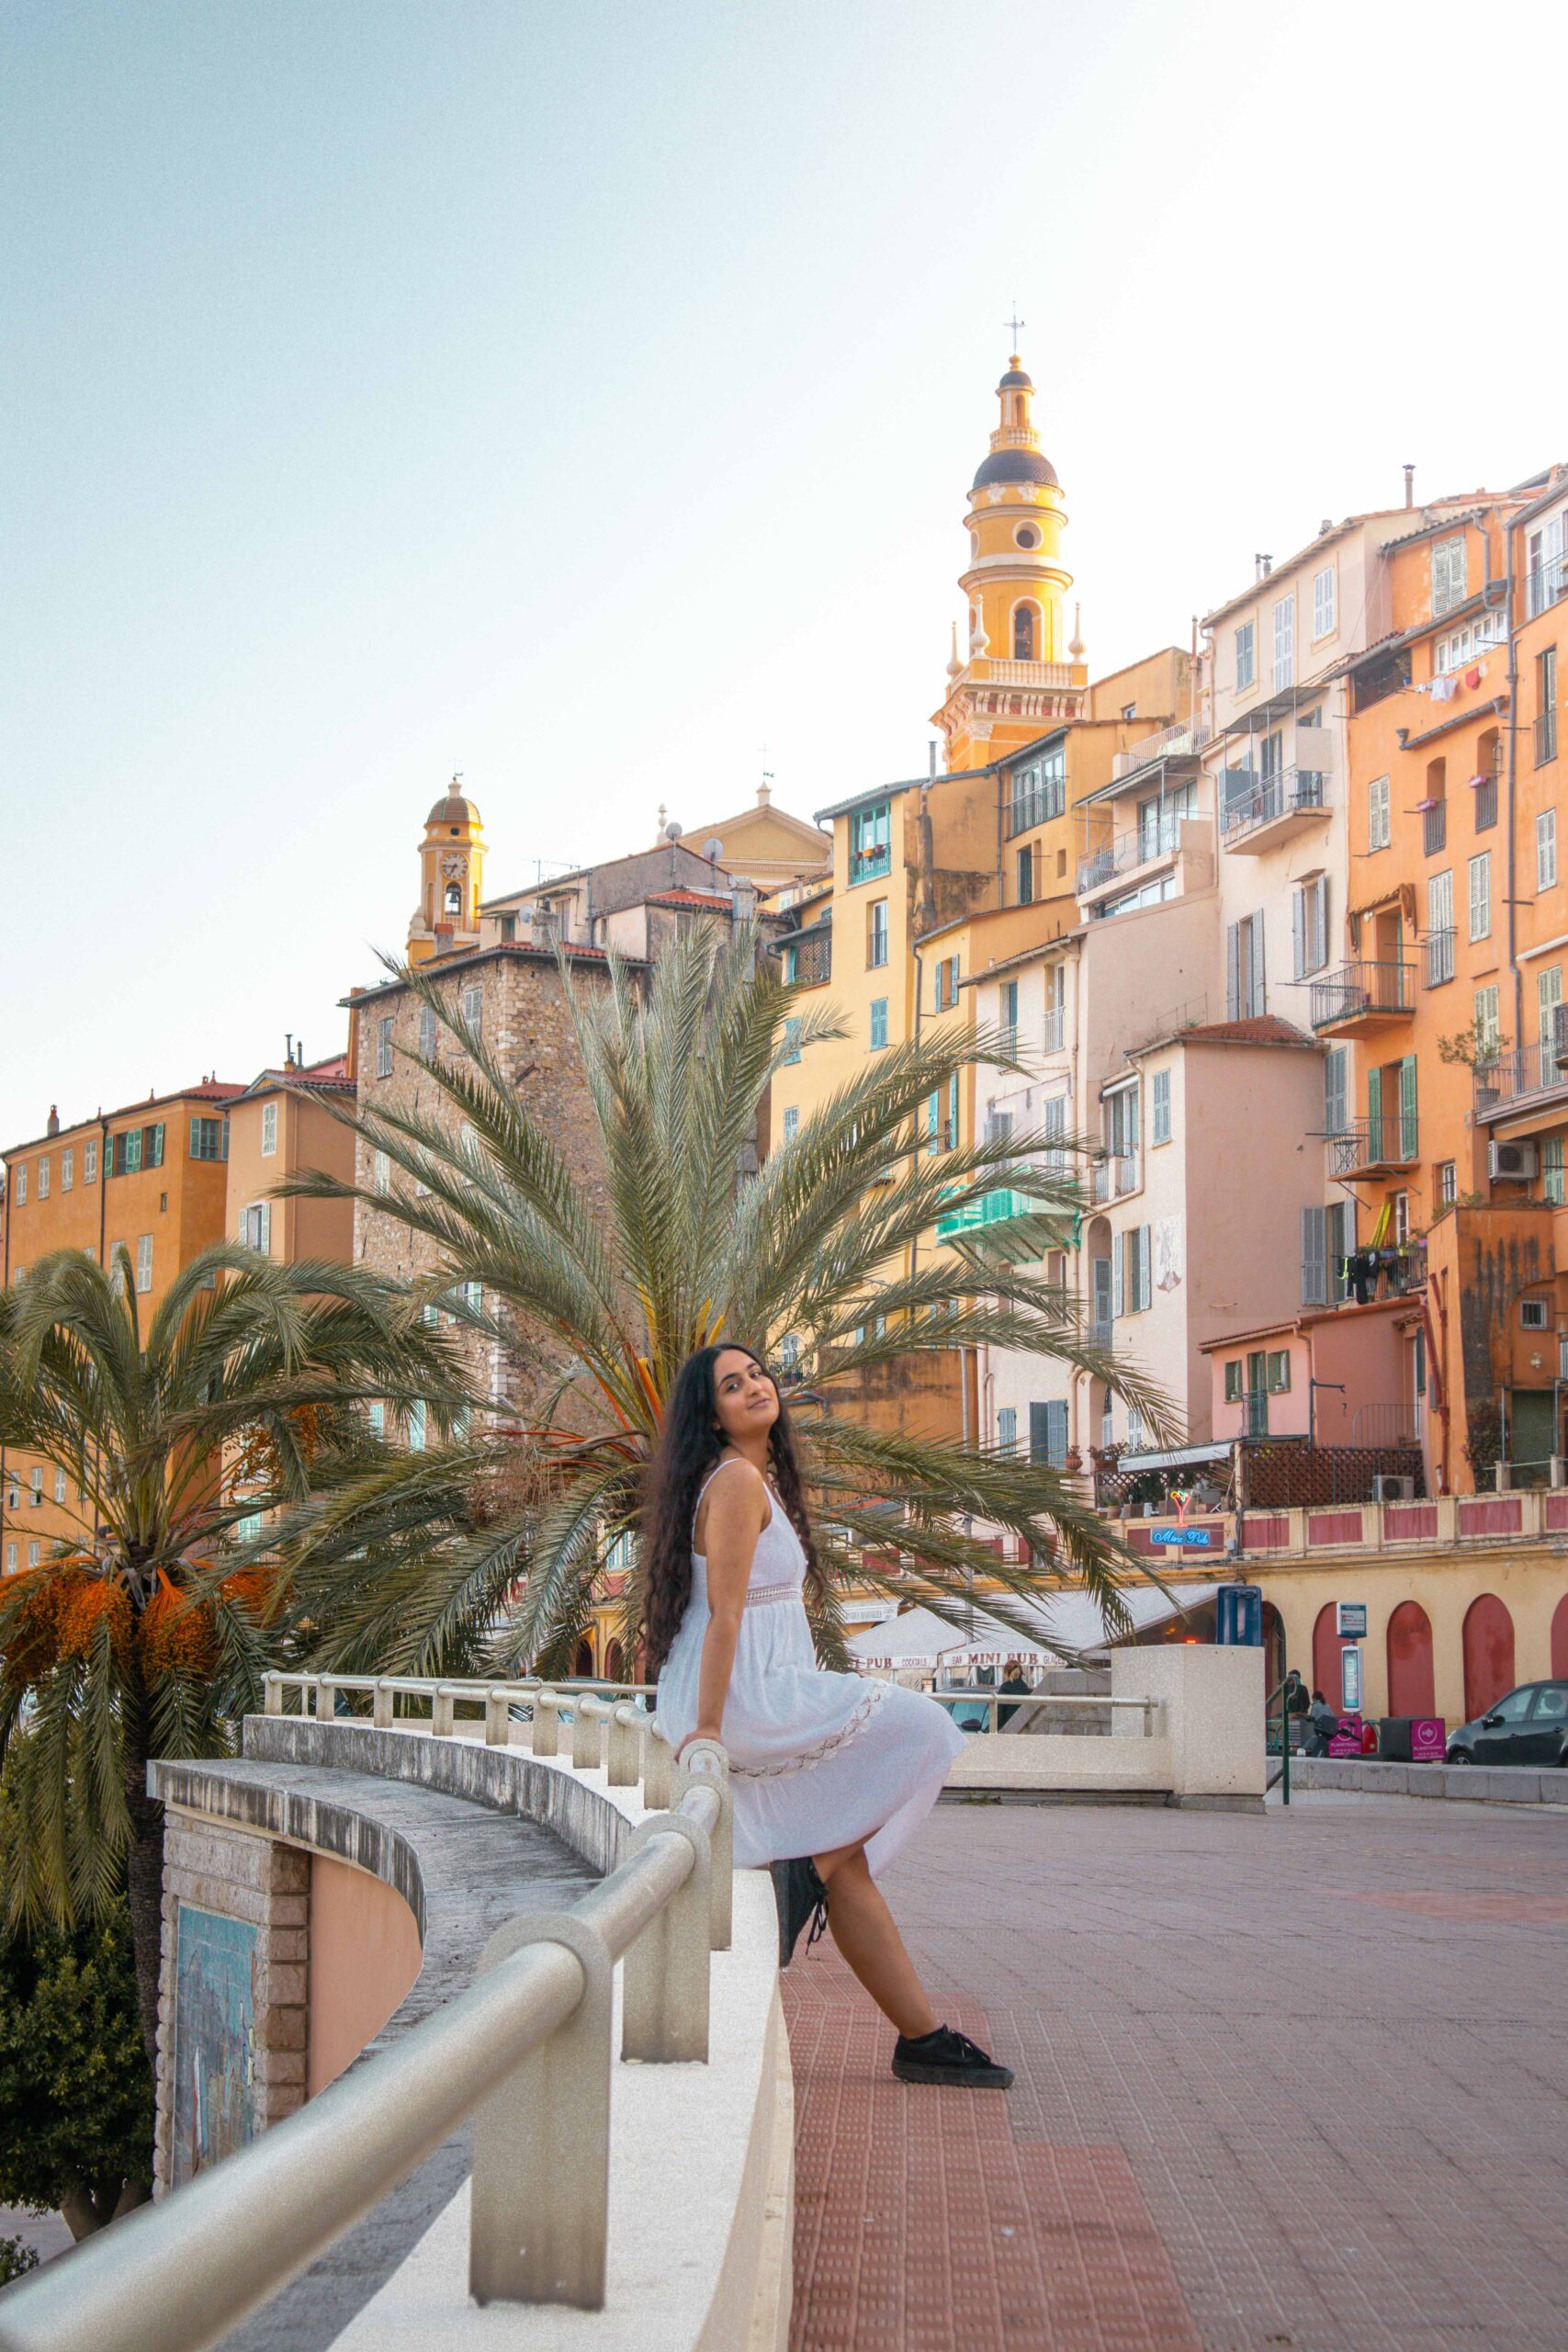 Woman wearing a white dress posing at Menton's waterfront ("Quai Bonaparte"), featuring a view of the bell tower of Saint Michael Archangel Basilica in Menton, France